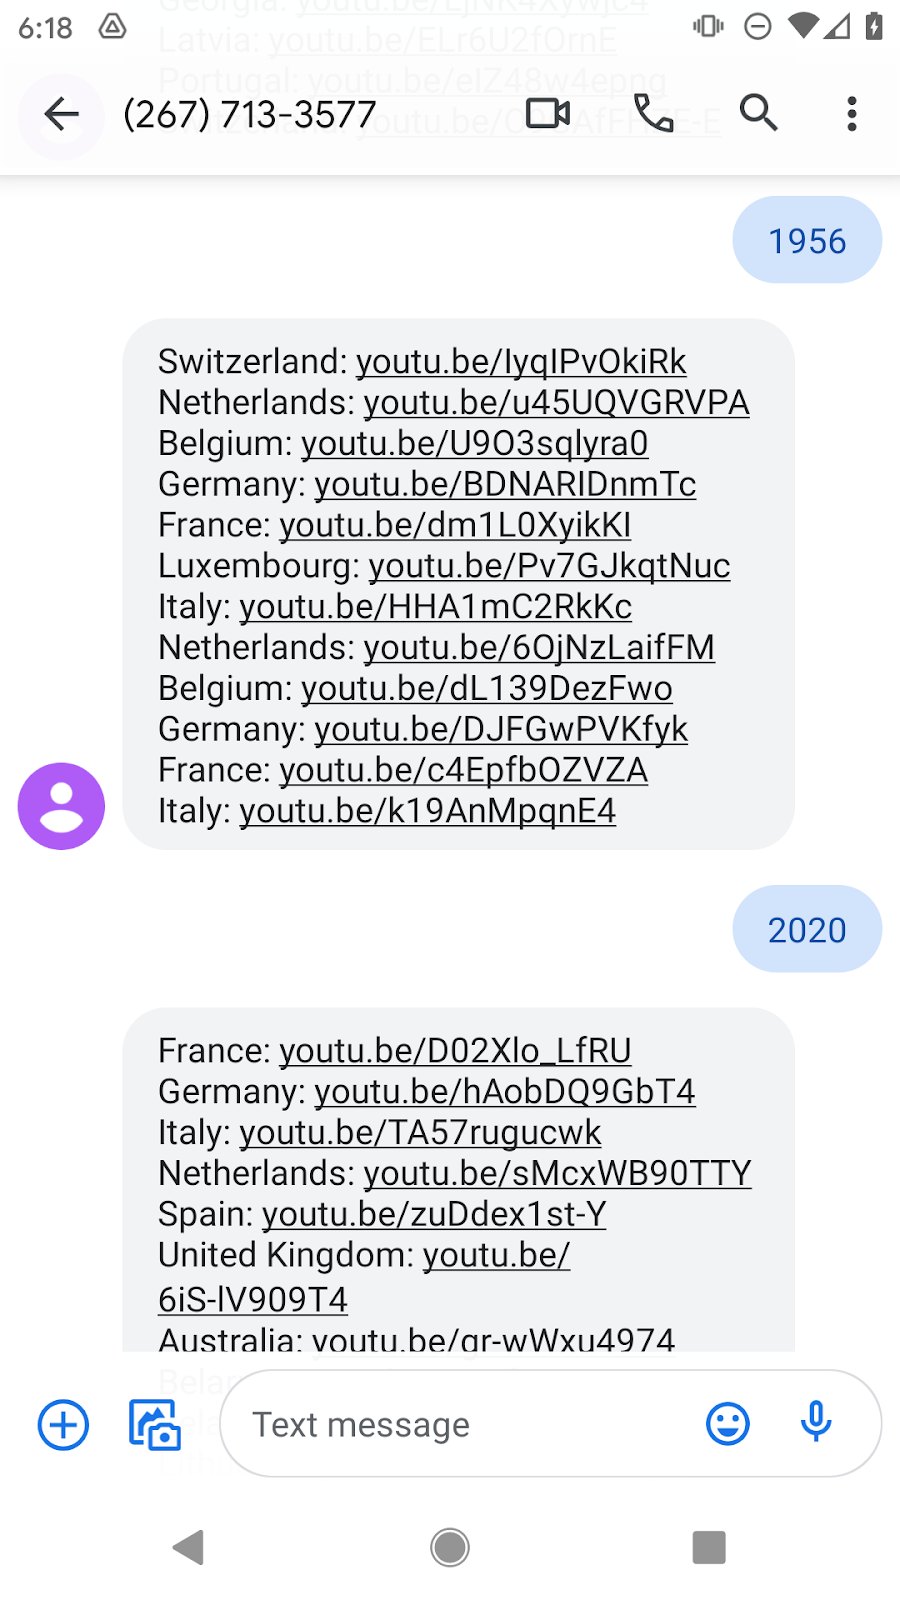 SMS messages from the app with YouTube links for performances for the requested year